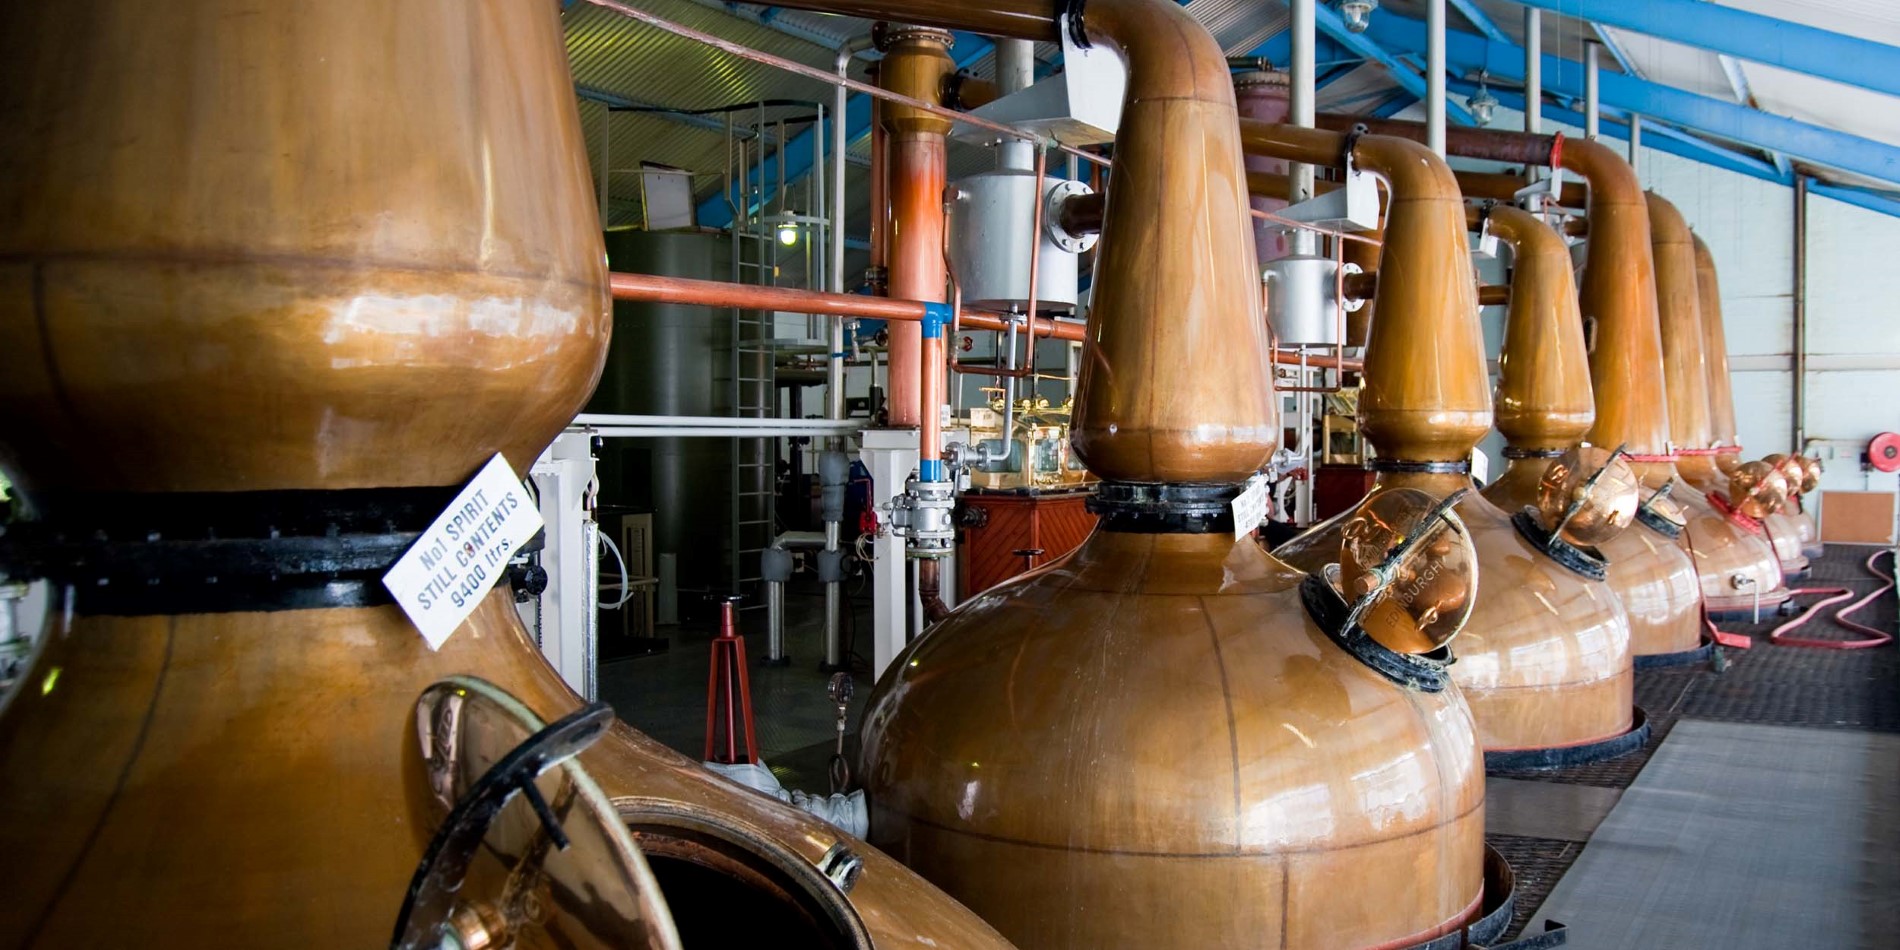 Learn about whisky distilling in Islay.